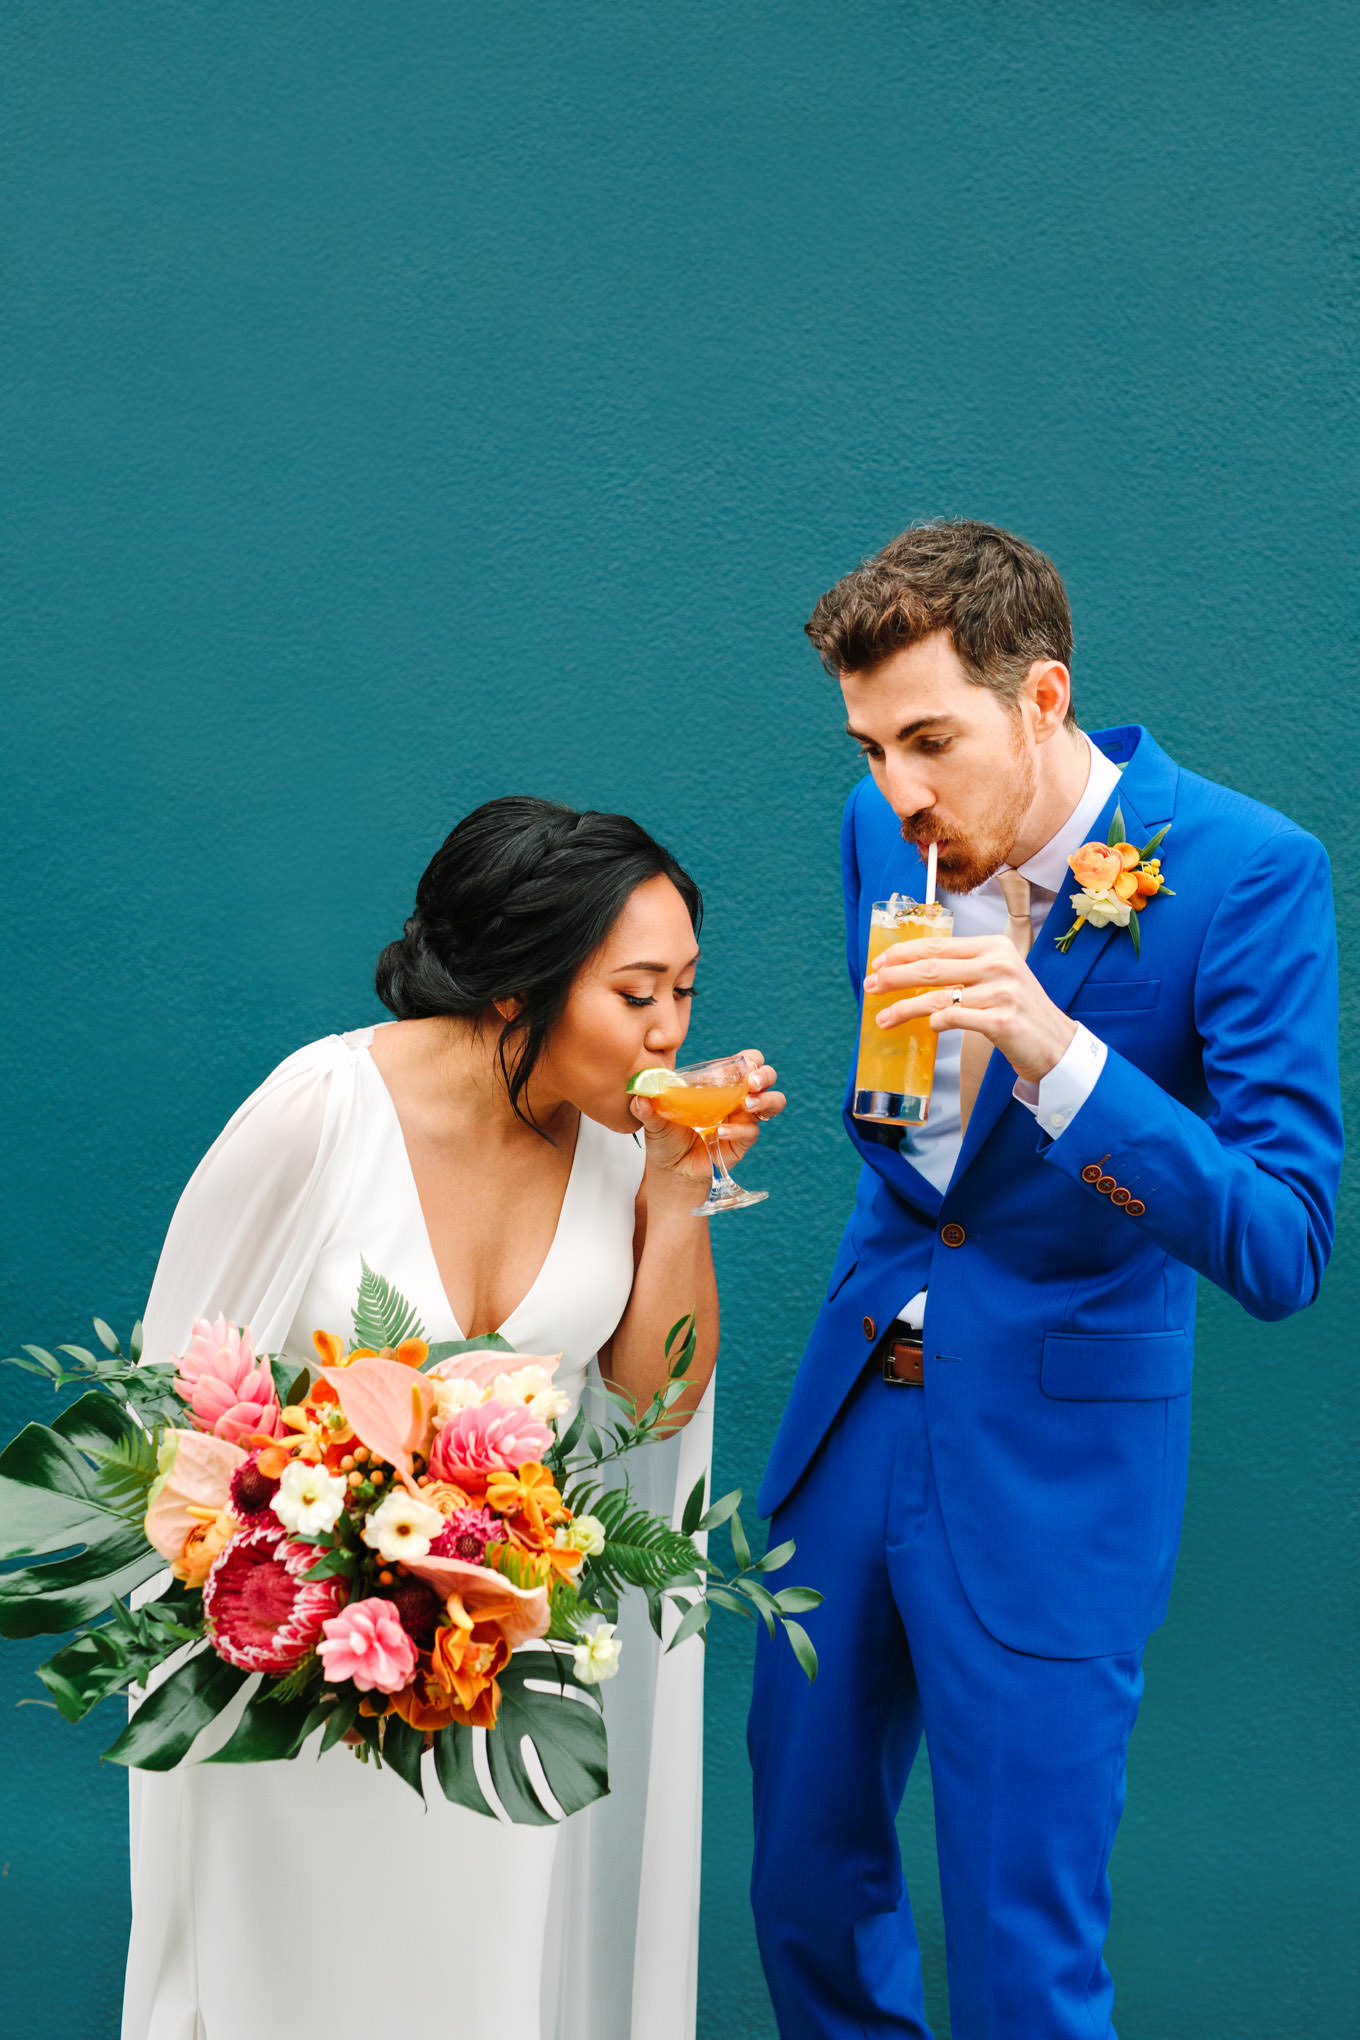 Bride and groom in bright blue suit drinking cocktails at The Fig House | Engagement, elopement, and wedding photography roundup of Mary Costa’s favorite images from 2020 | Colorful and elevated photography for fun-loving couples in Southern California | #2020wedding #elopement #weddingphoto #weddingphotography   Source: Mary Costa Photography | Los Angeles